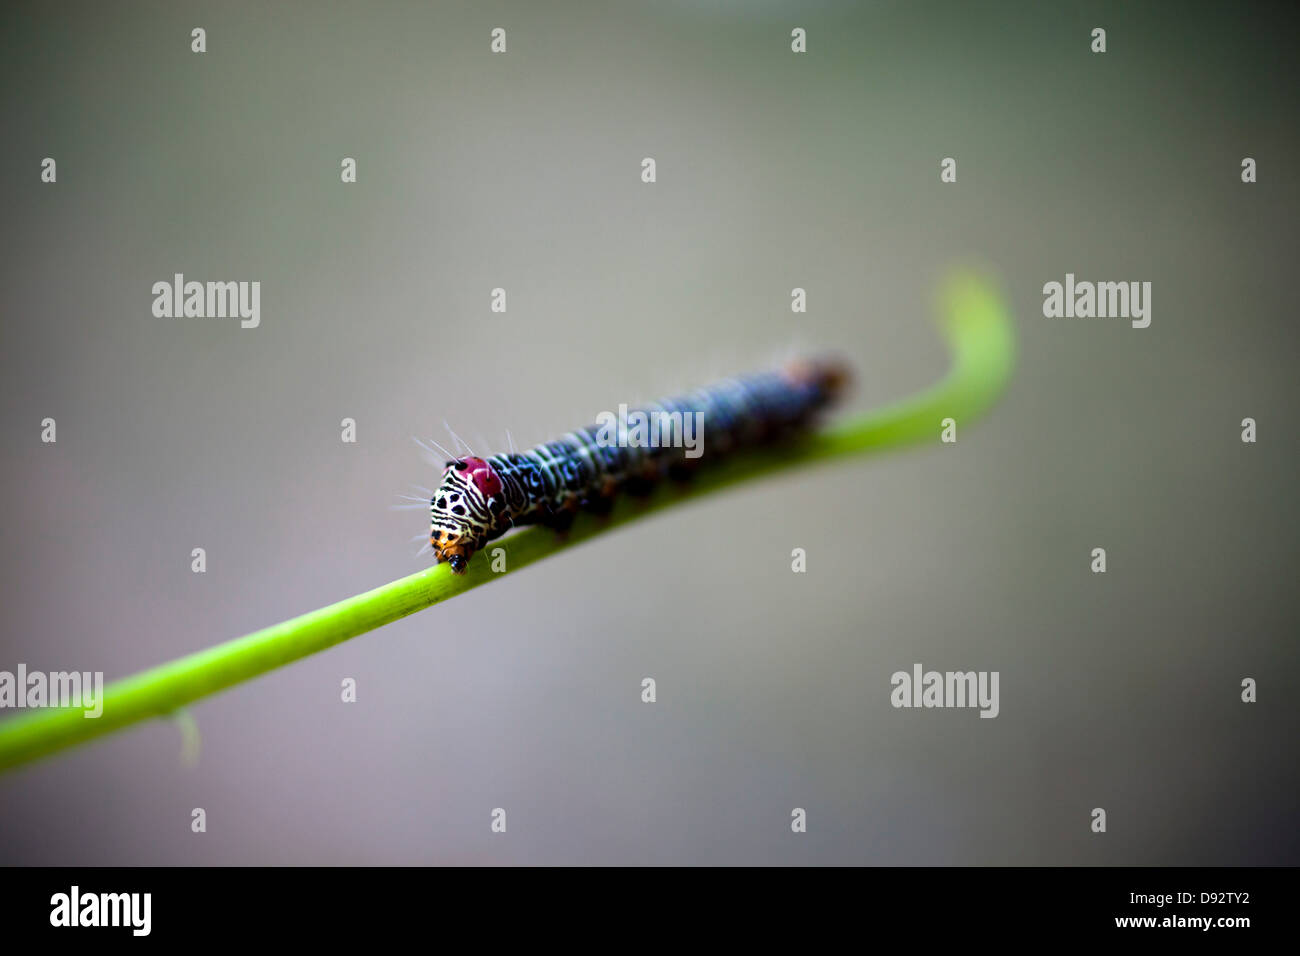 A vibrantly patterned caterpillar on a green stem, extreme close up Stock Photo